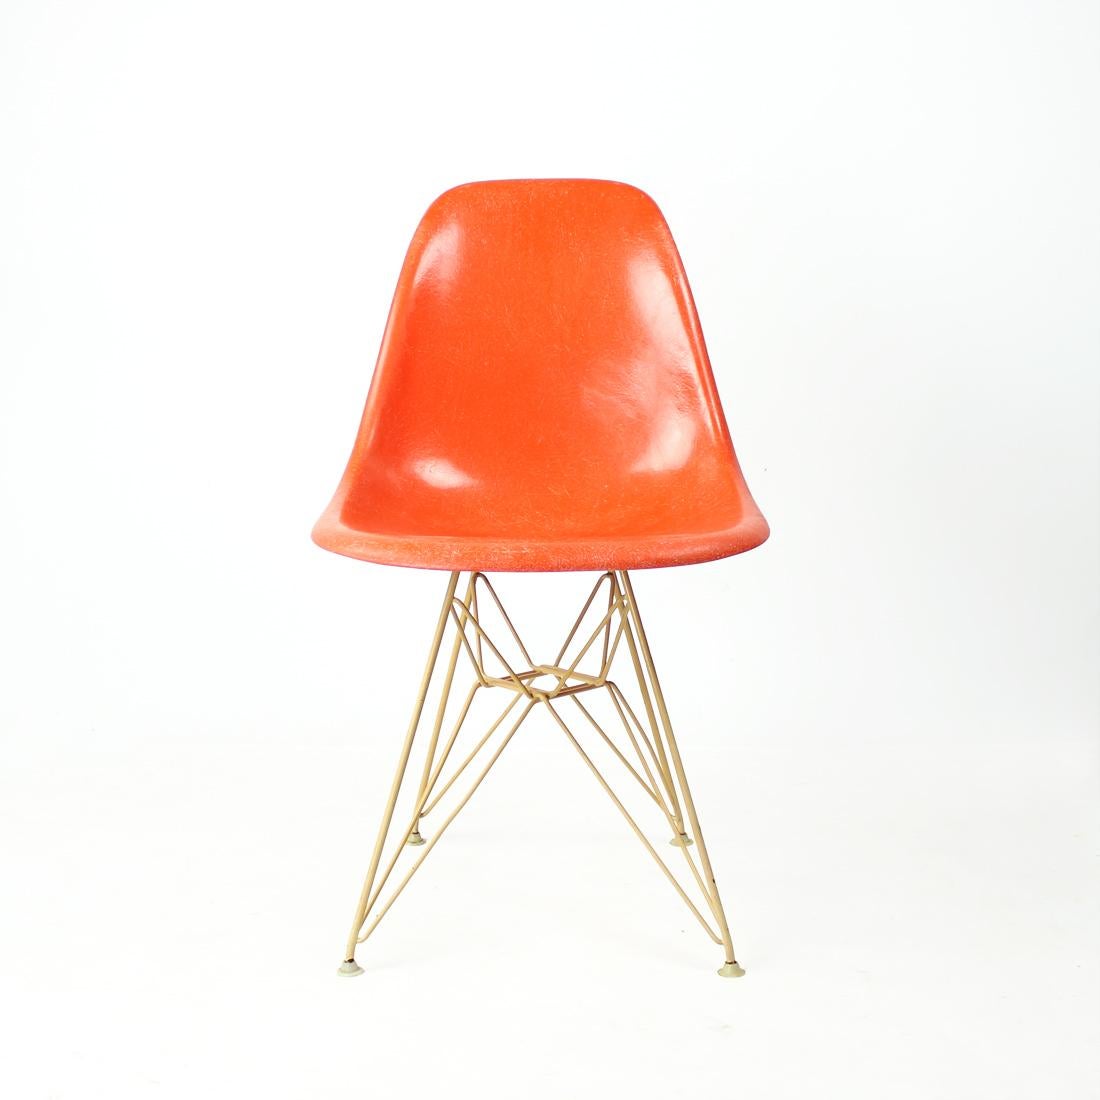 Mid-Century Modern Orange Eiffel Shell Chair By Charles And Ray Eames For Herman Miller, 1960s For Sale